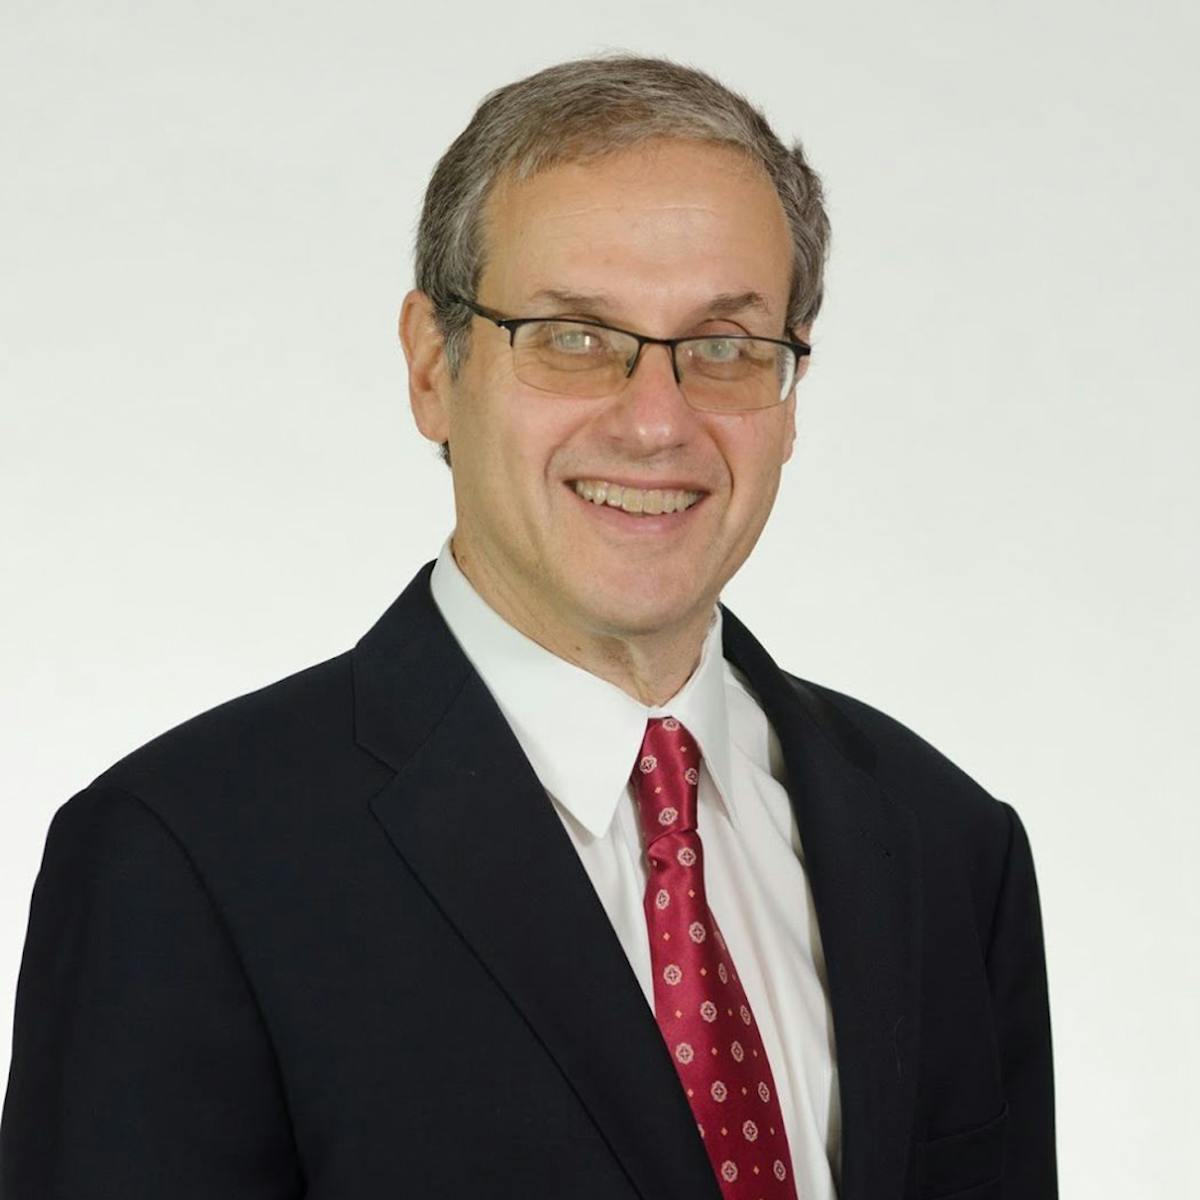 Barry Epstein is President of Vertex Capital, a business brokerage specializing in the security and life safety industries. Visit https://vertexcapitalcorp.com for more information.